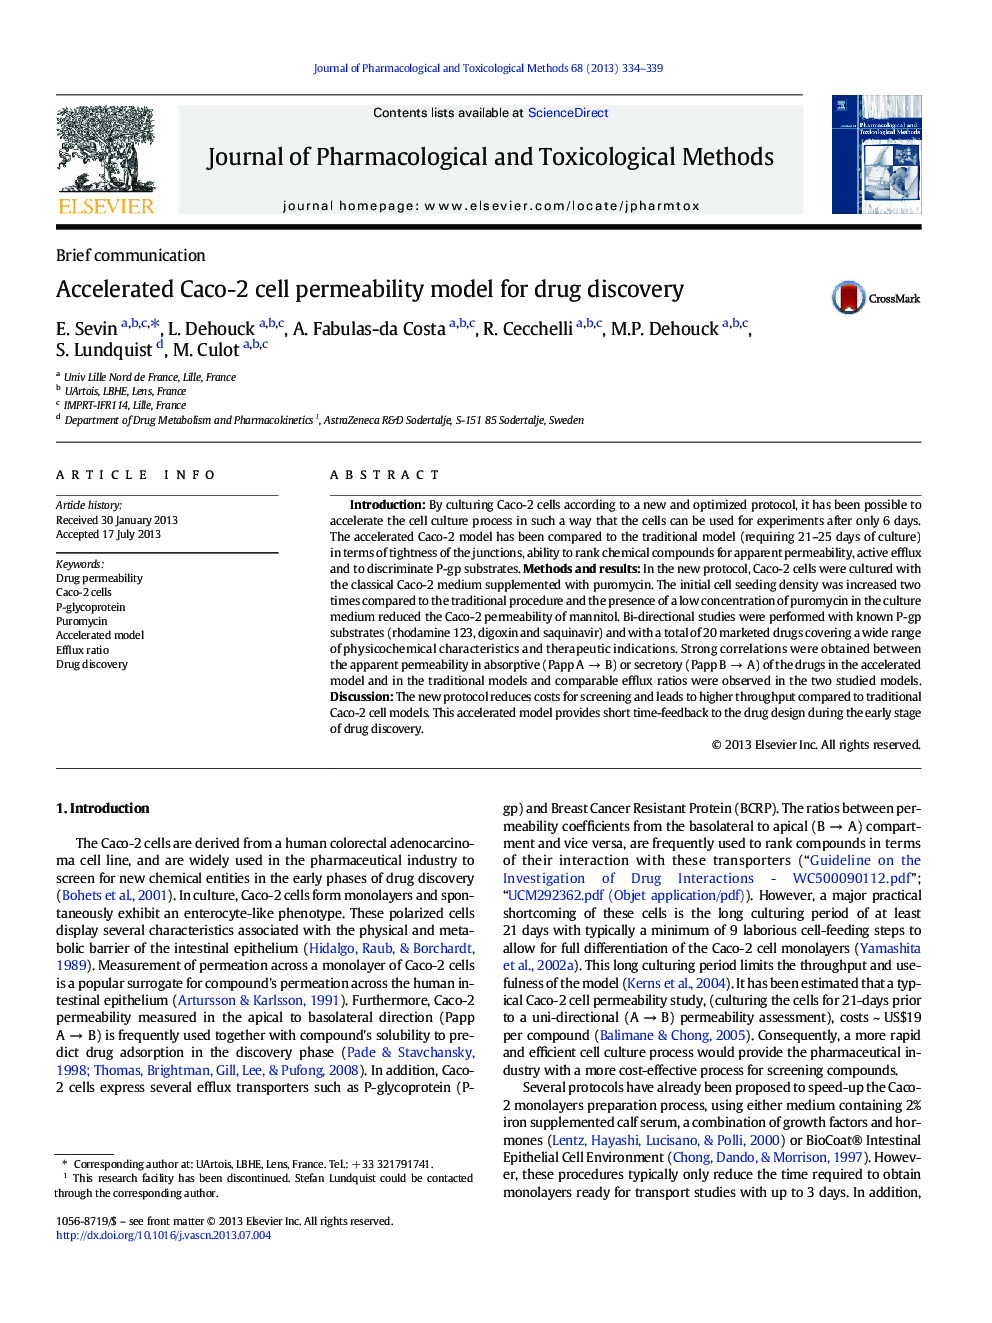 Accelerated Caco-2 cell permeability model for drug discovery